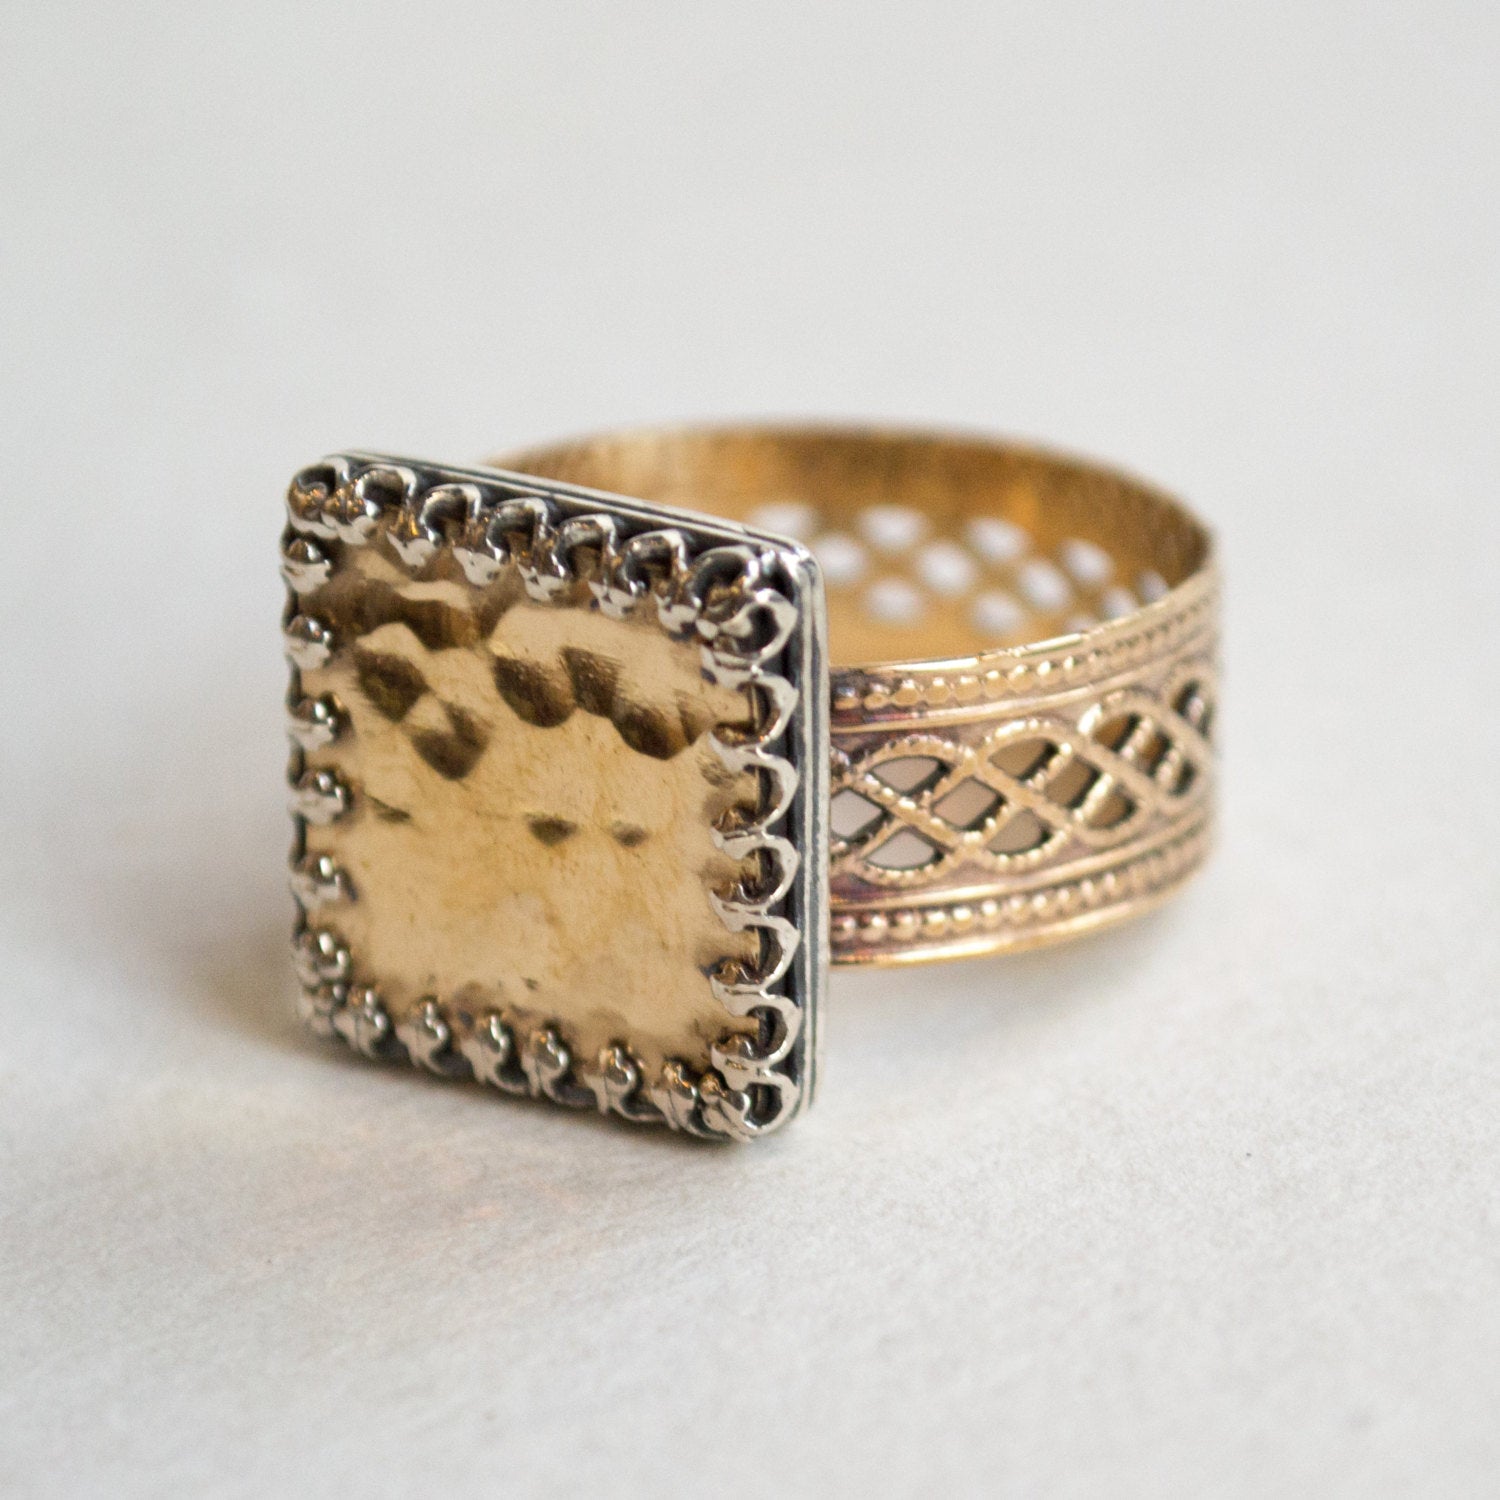 Gold silver ring, square gold filled ring, statement ring, twotone Square ring, unique ring for her, boho ring, gypsy - Be For Real R2254